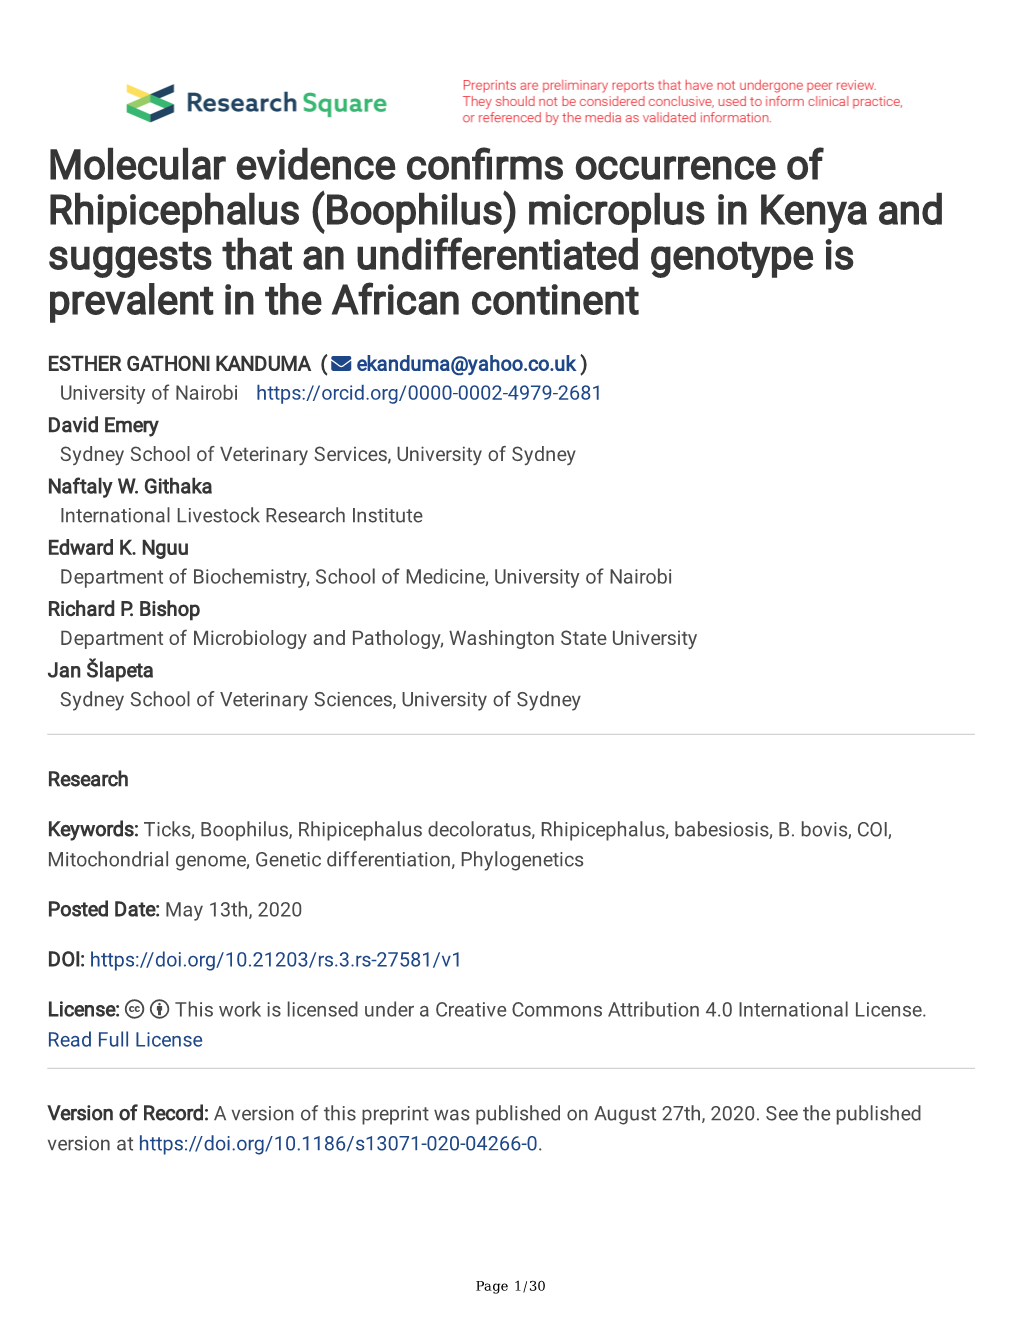 Boophilus) Microplus in Kenya and Suggests That an Undifferentiated Genotype Is Prevalent in the African Continent